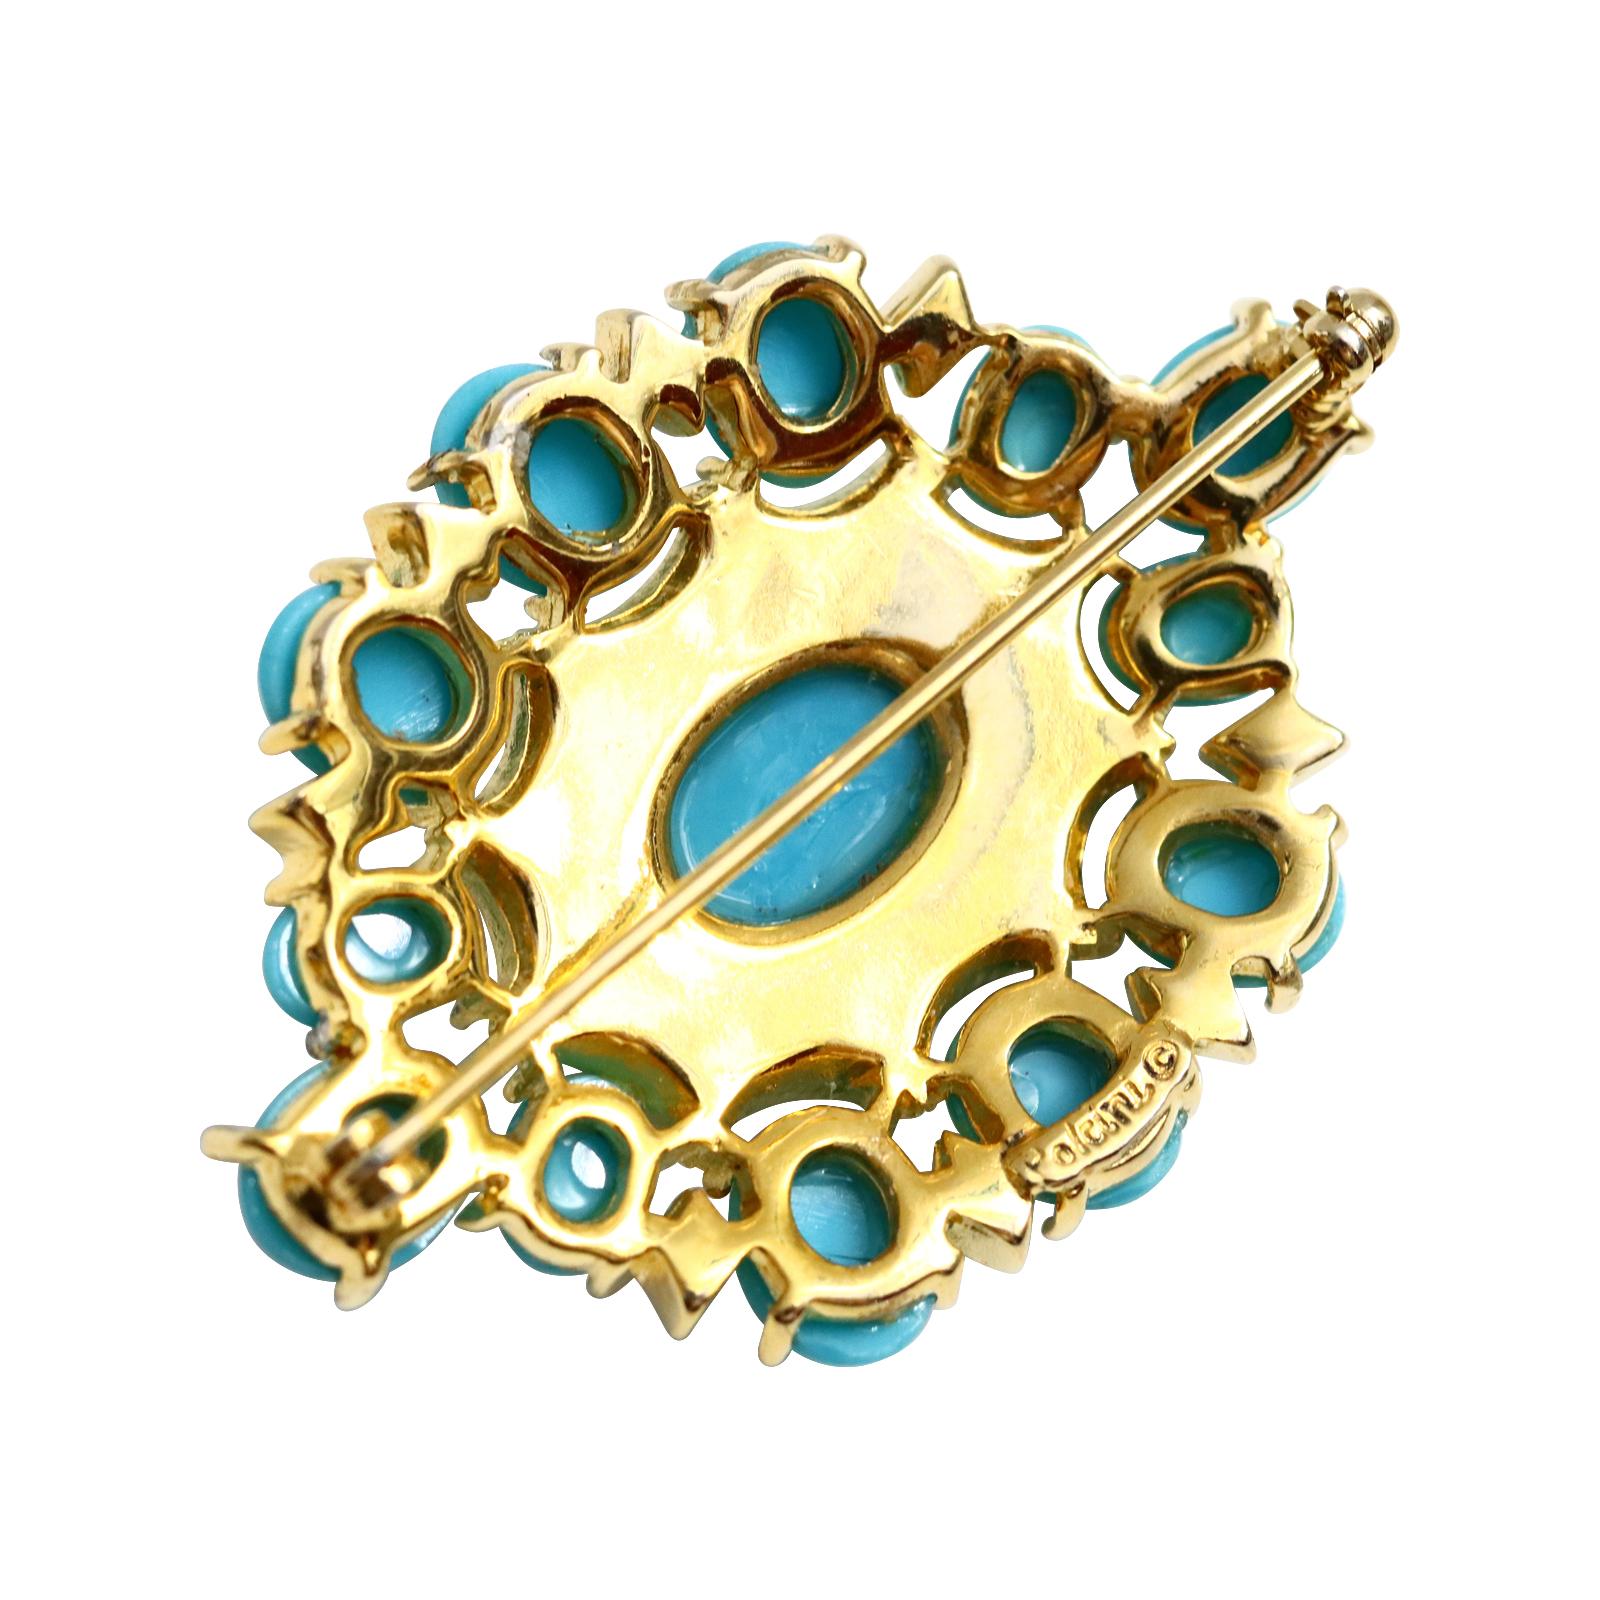 Women's or Men's Vintage Polcini Diamante with Faux Turquoise Brooch Circa 1980s For Sale